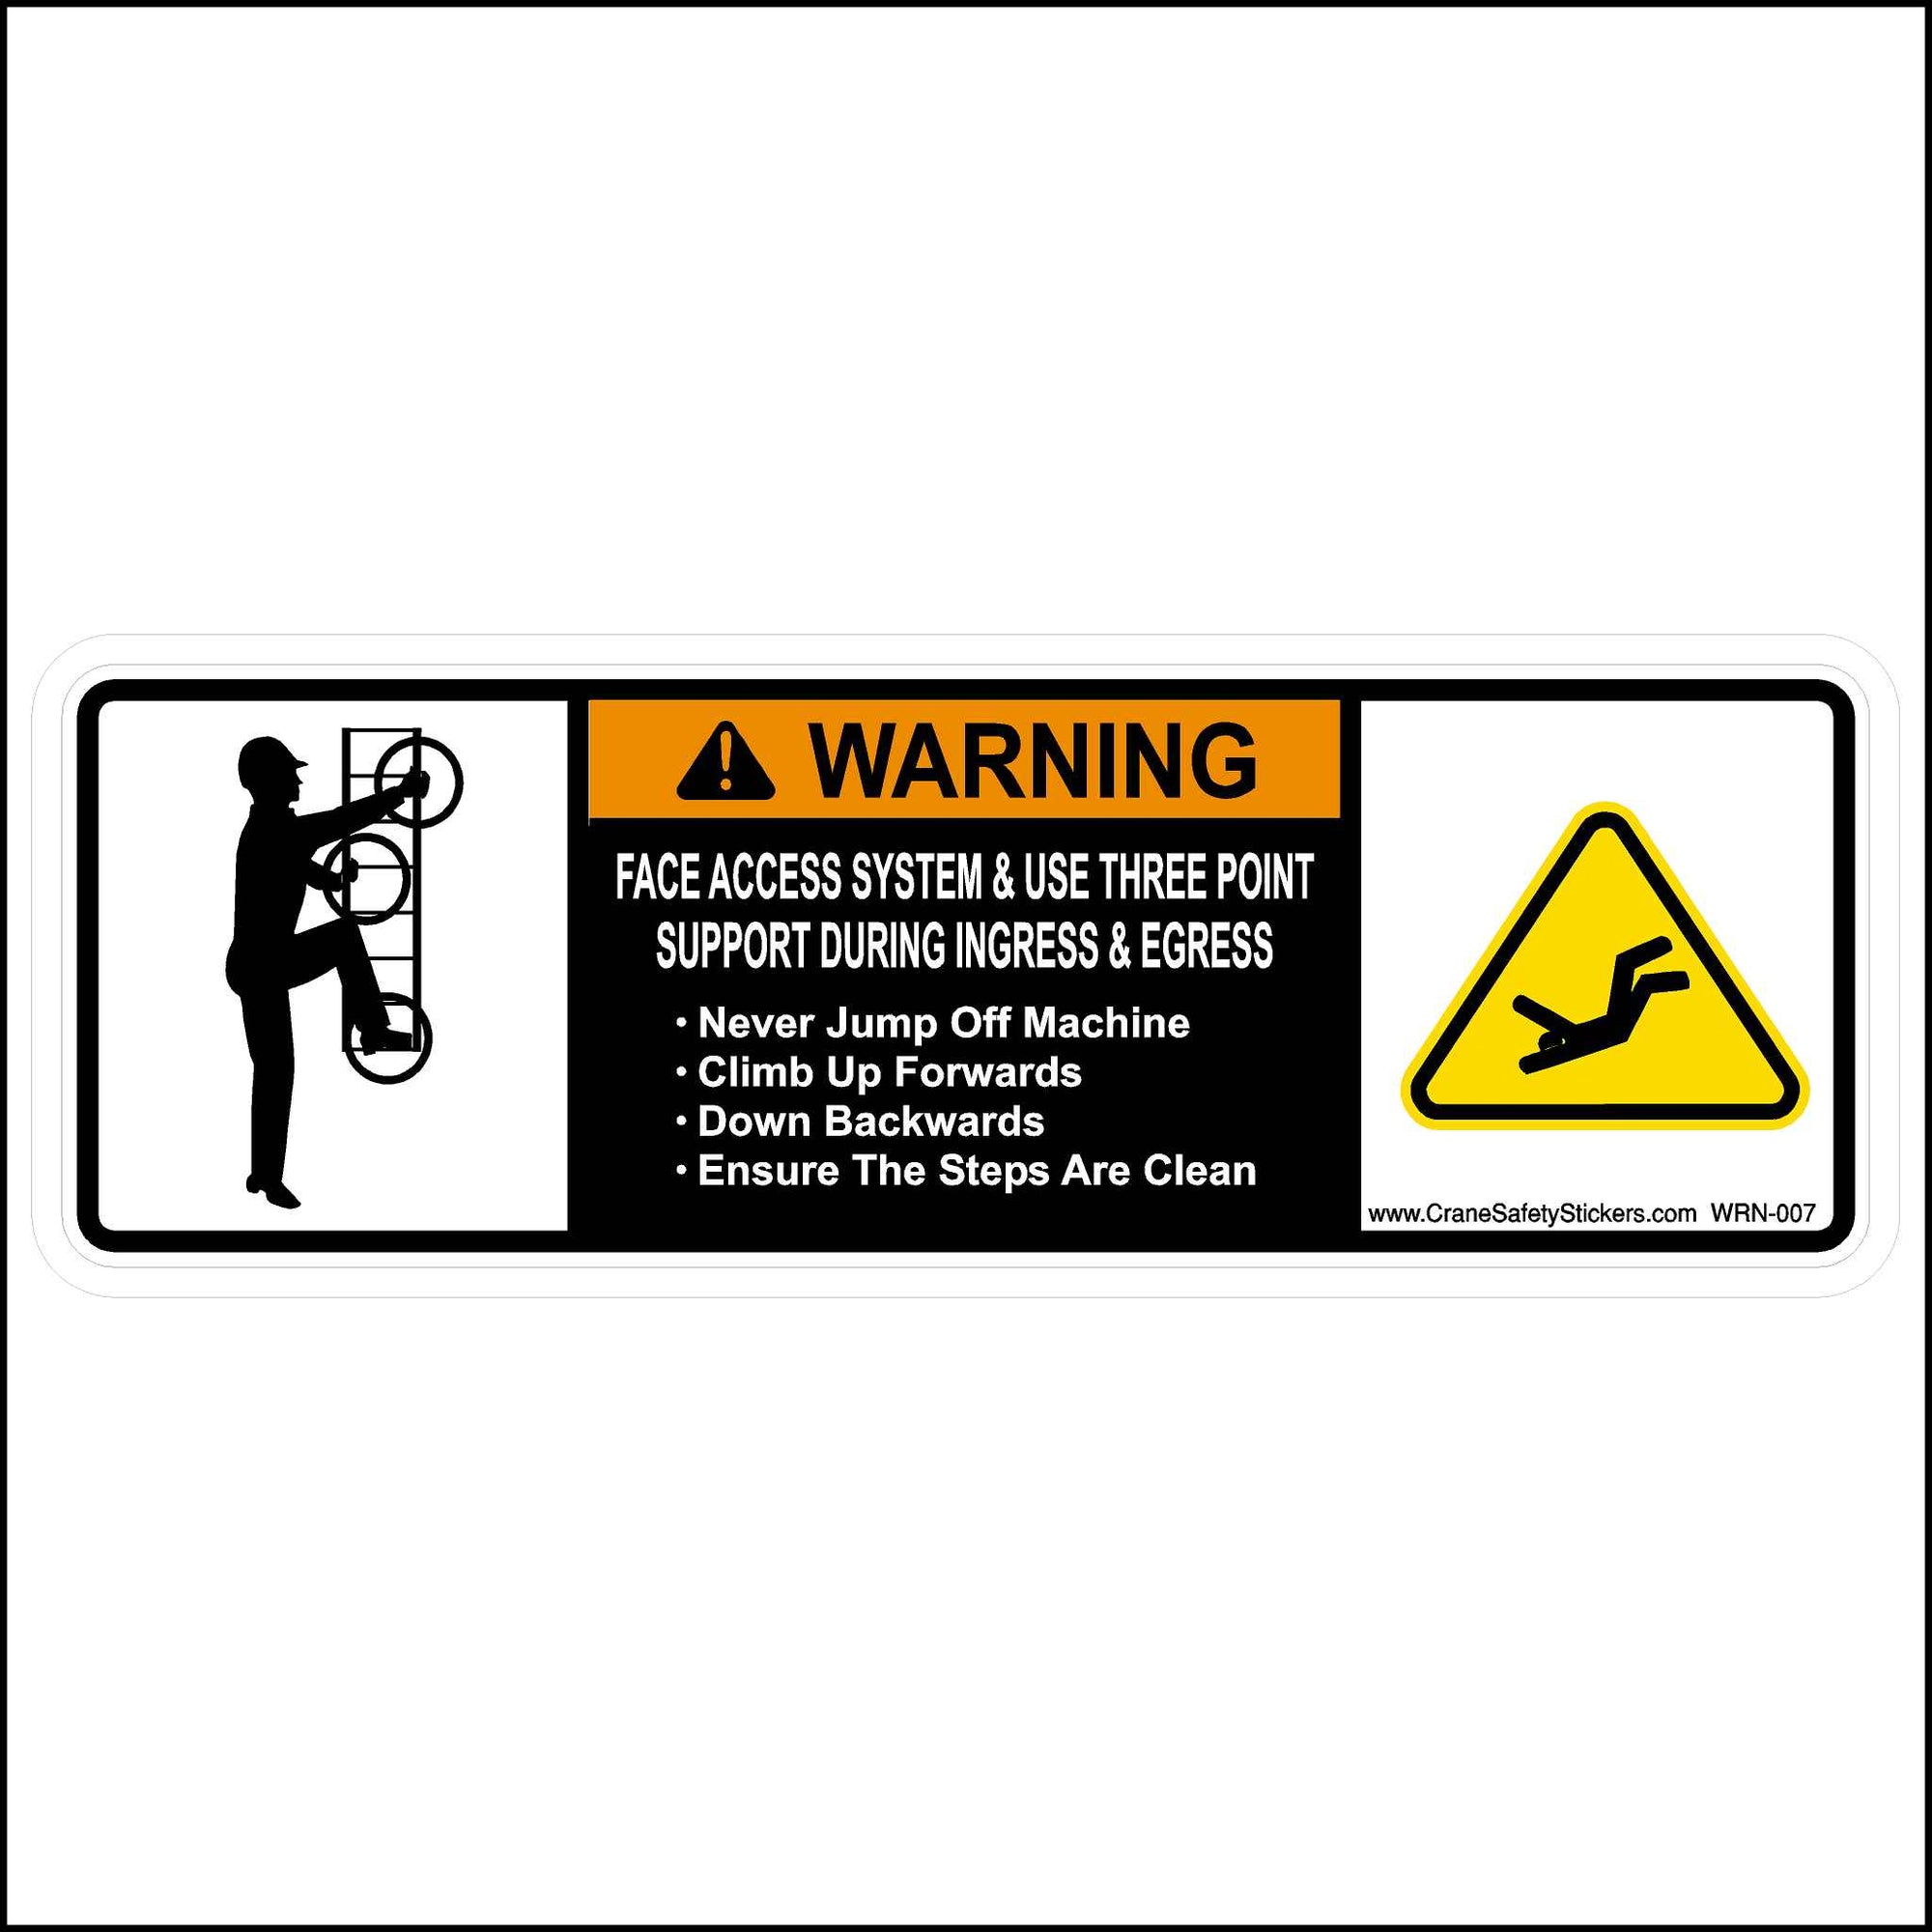 This 3 points of contact sticker is printed with. WARNING Face Access System and use three-point support during ingress and egress. Never jump Off the machine, Climb up Forward, Down Backwards, and Ensure the Steps Are Clean.